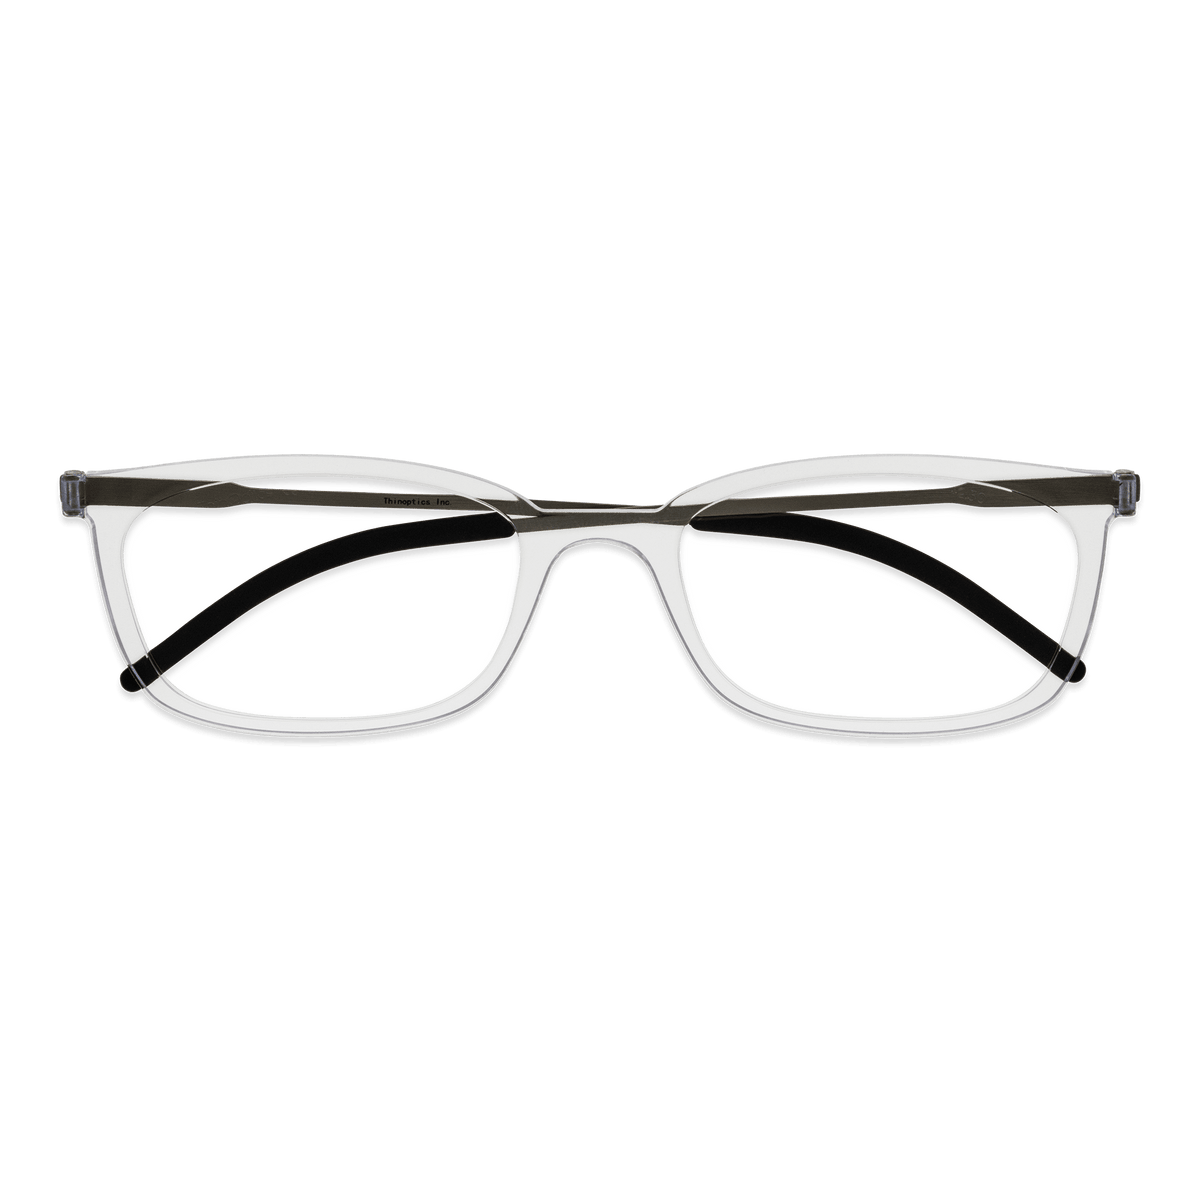 Thin Optics Reading Glasses - Always with You! MPSB